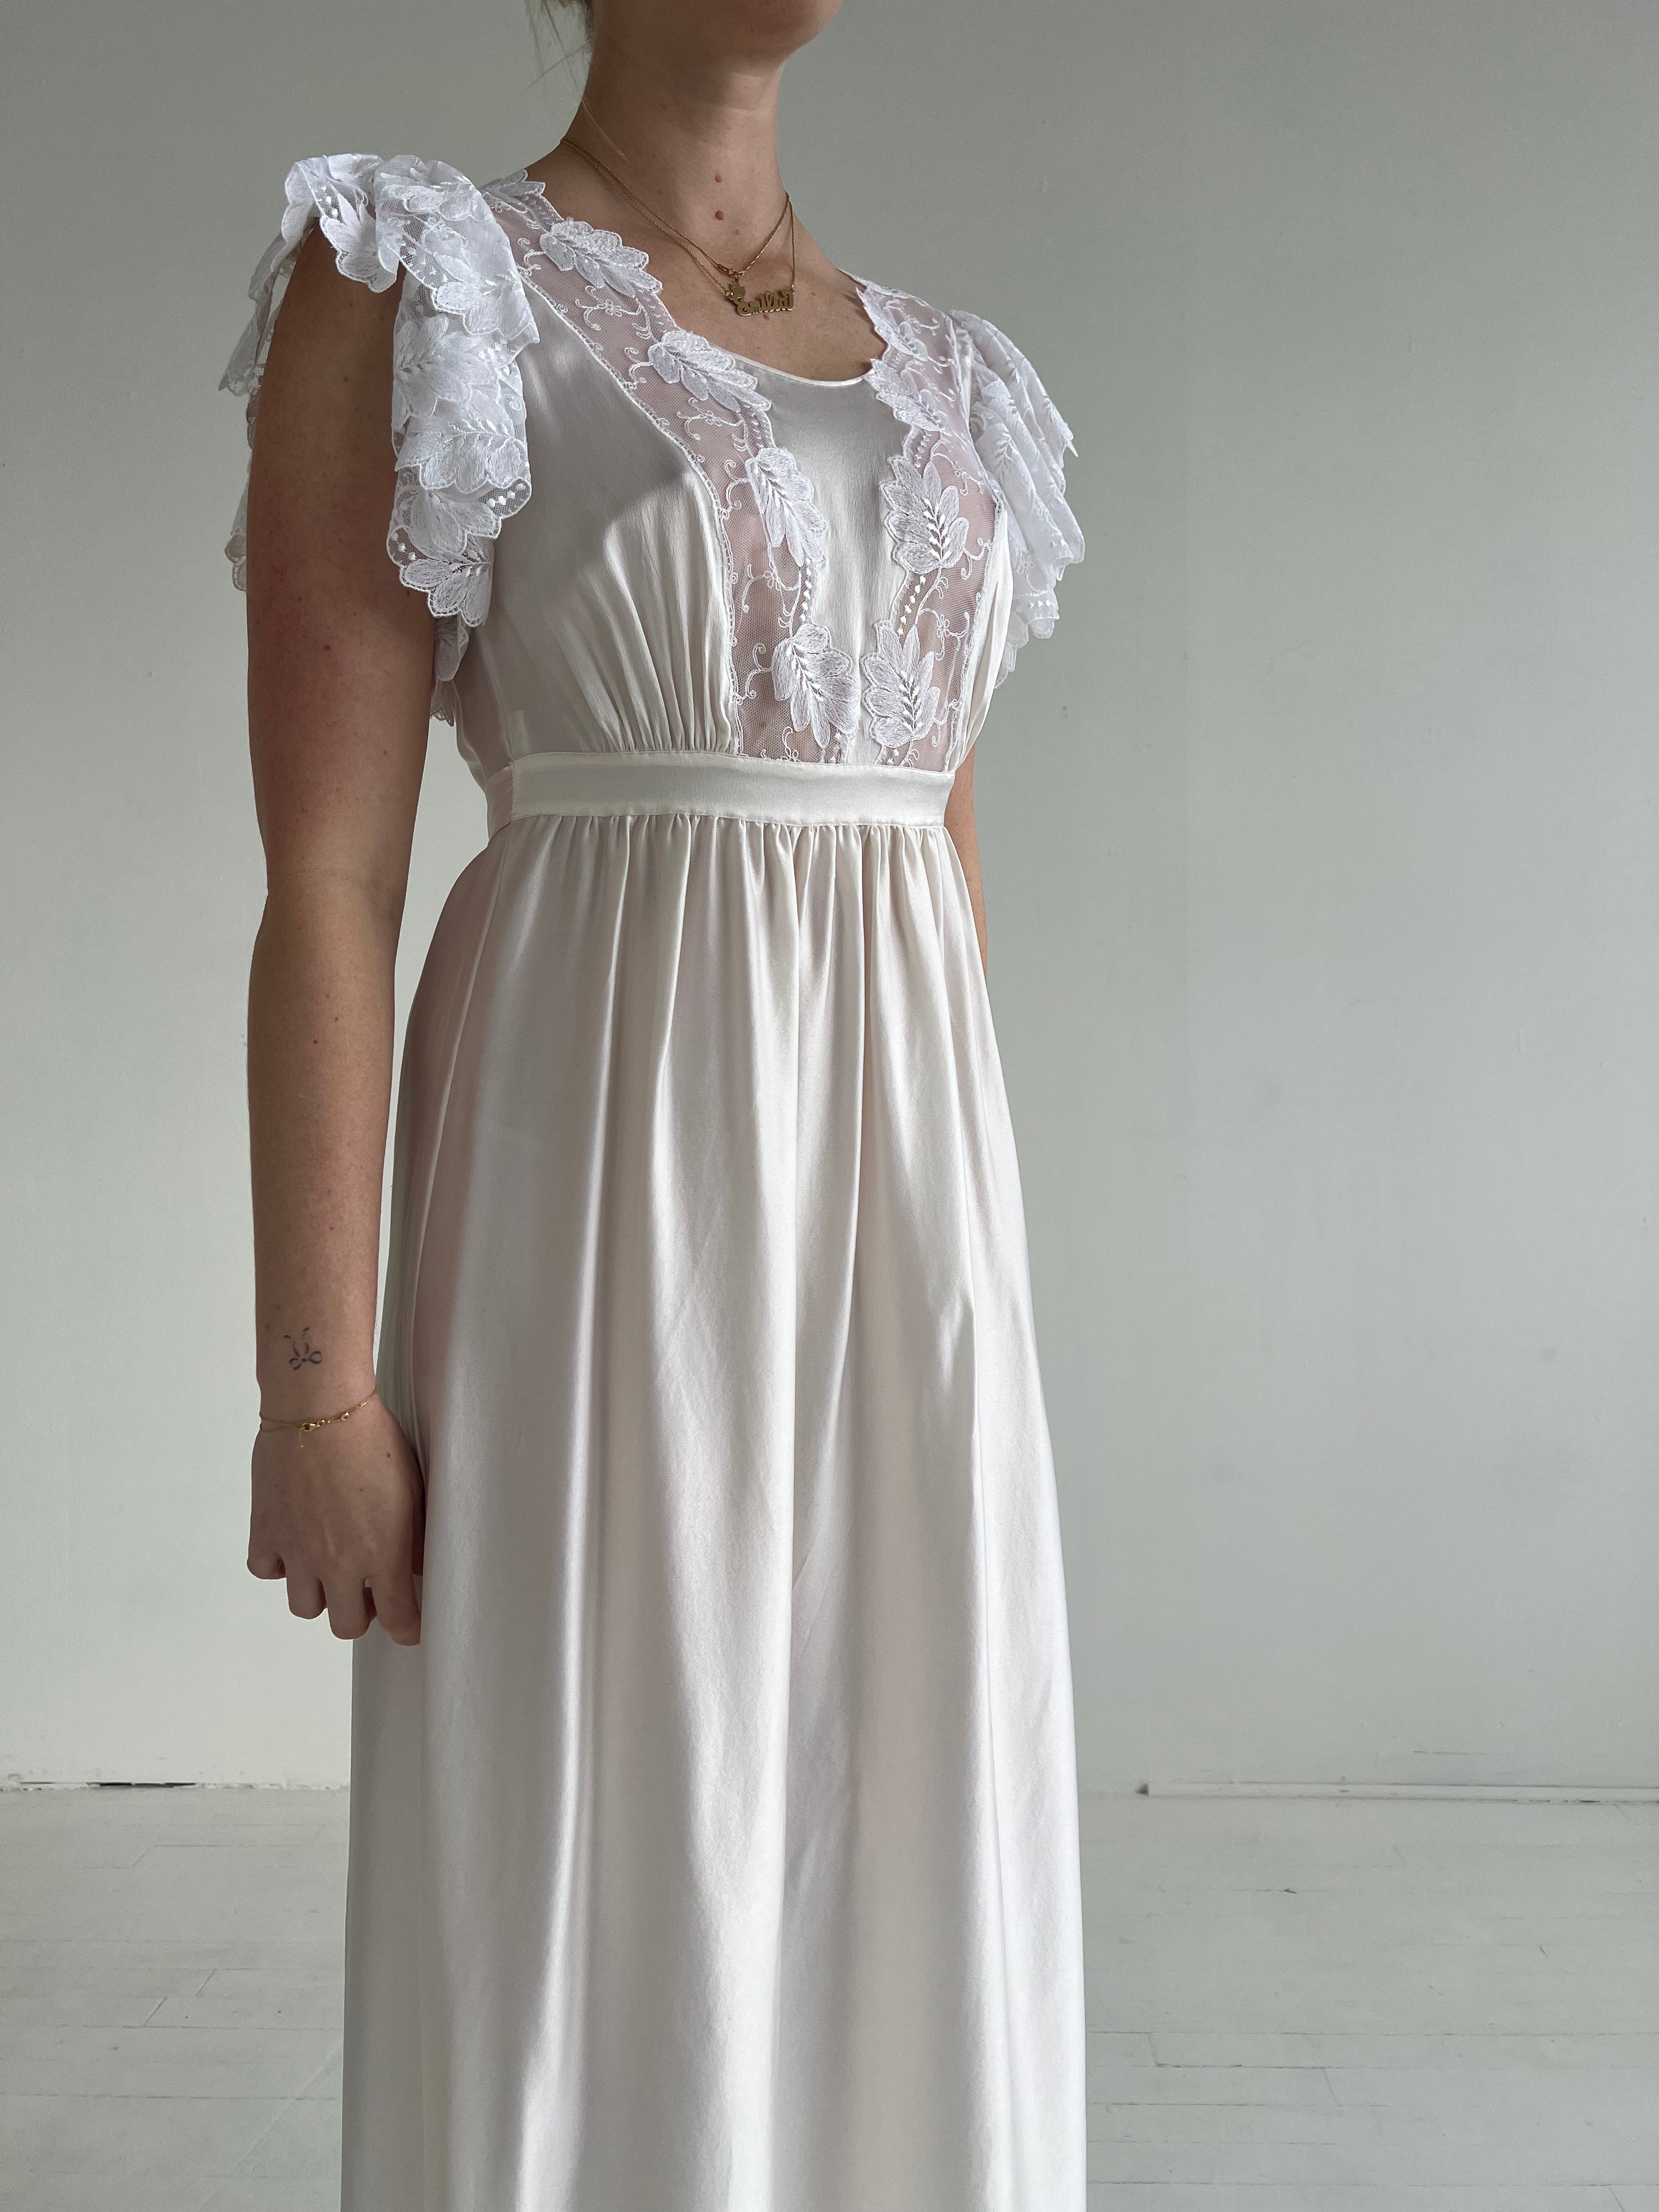 1960's White Dress with White Leaf Lace Ruffle